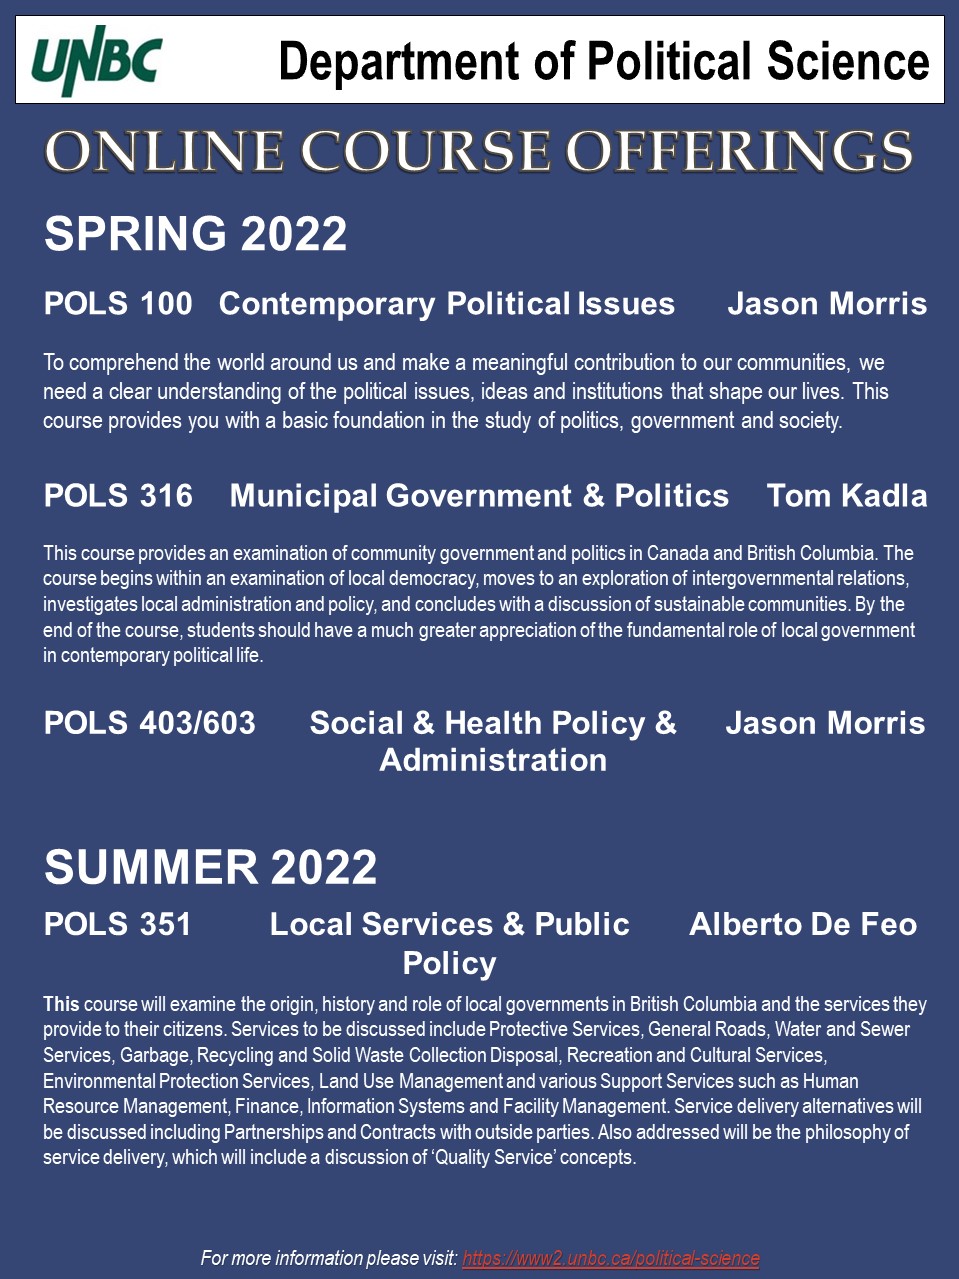 POLS Spring 2022 Course Offerings